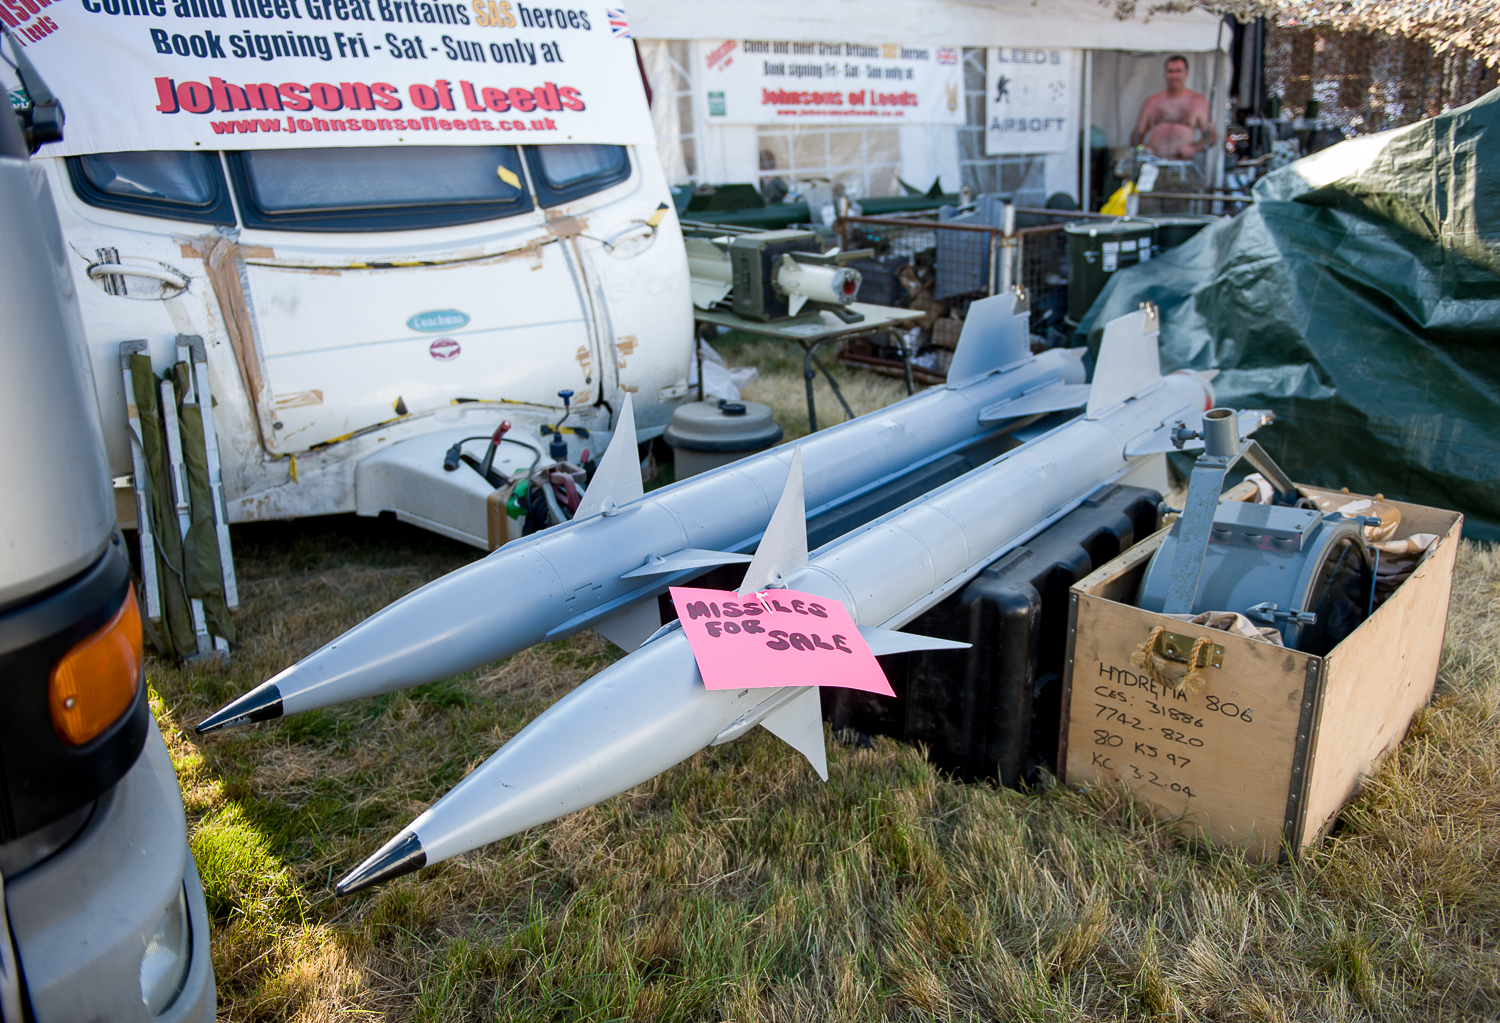  "Missiles for sale", War and peace show, Kent 